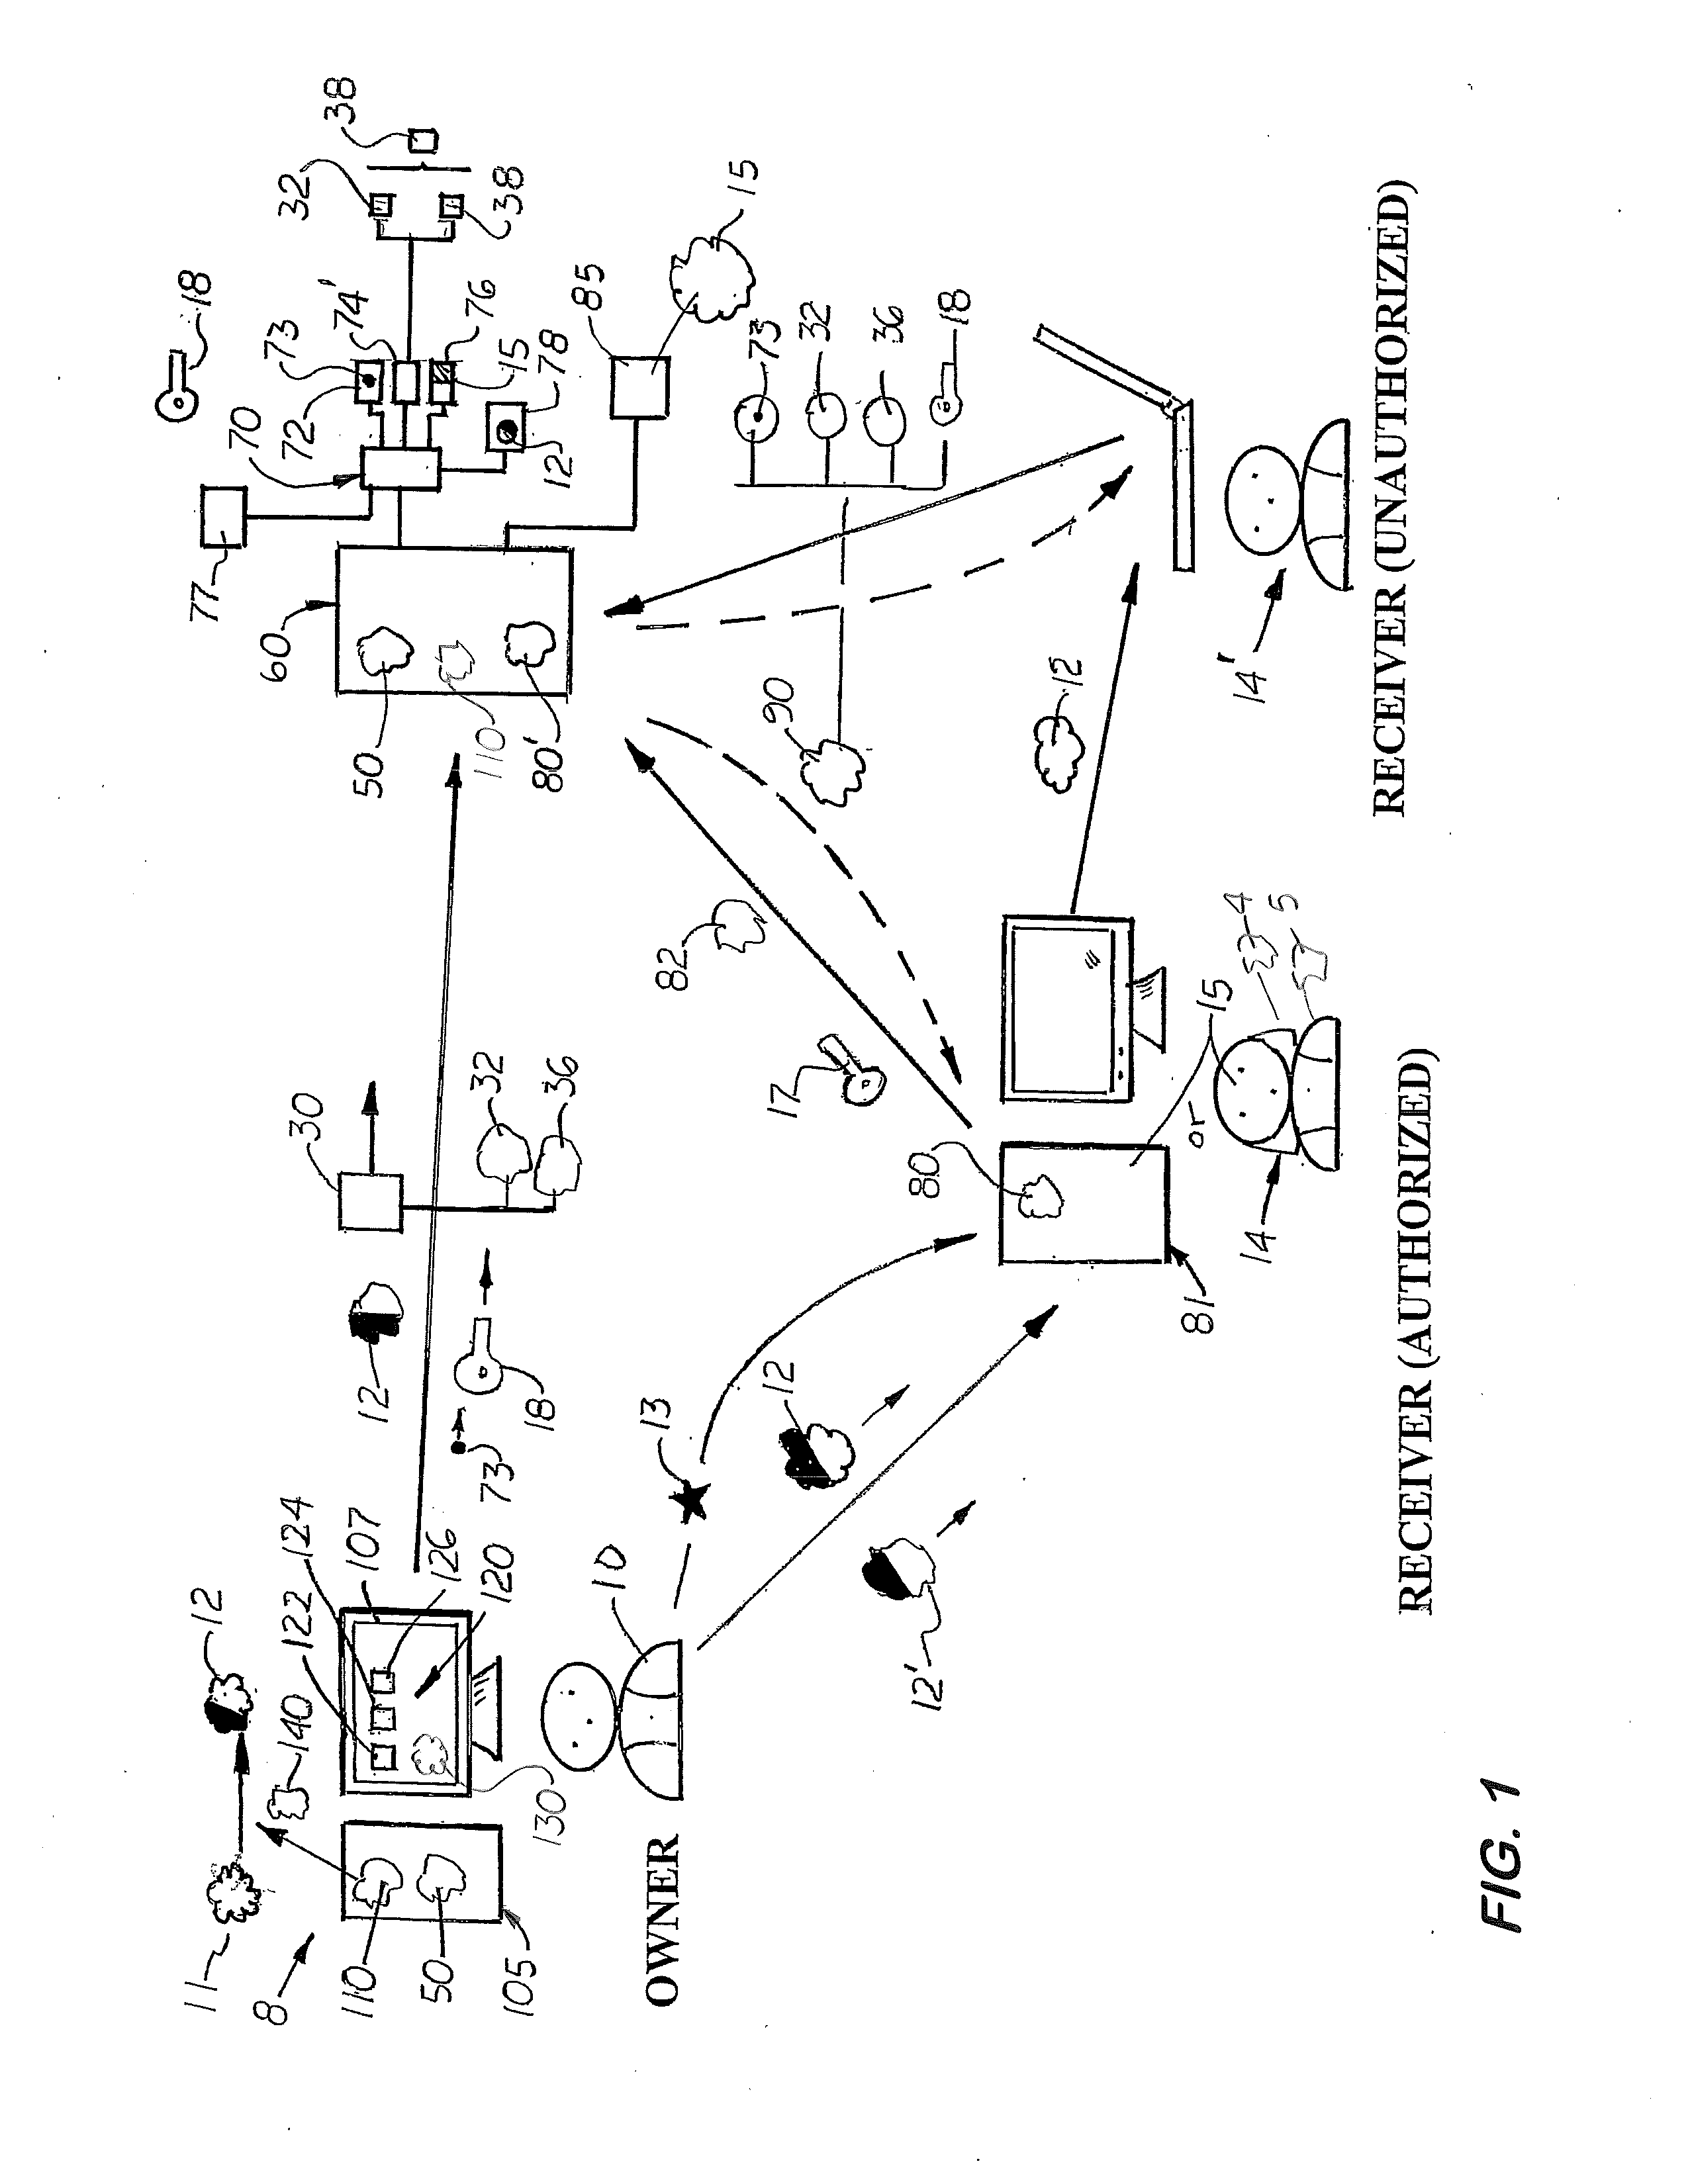 Owner Controlled Transmitted File Protection and Access Control System and Method